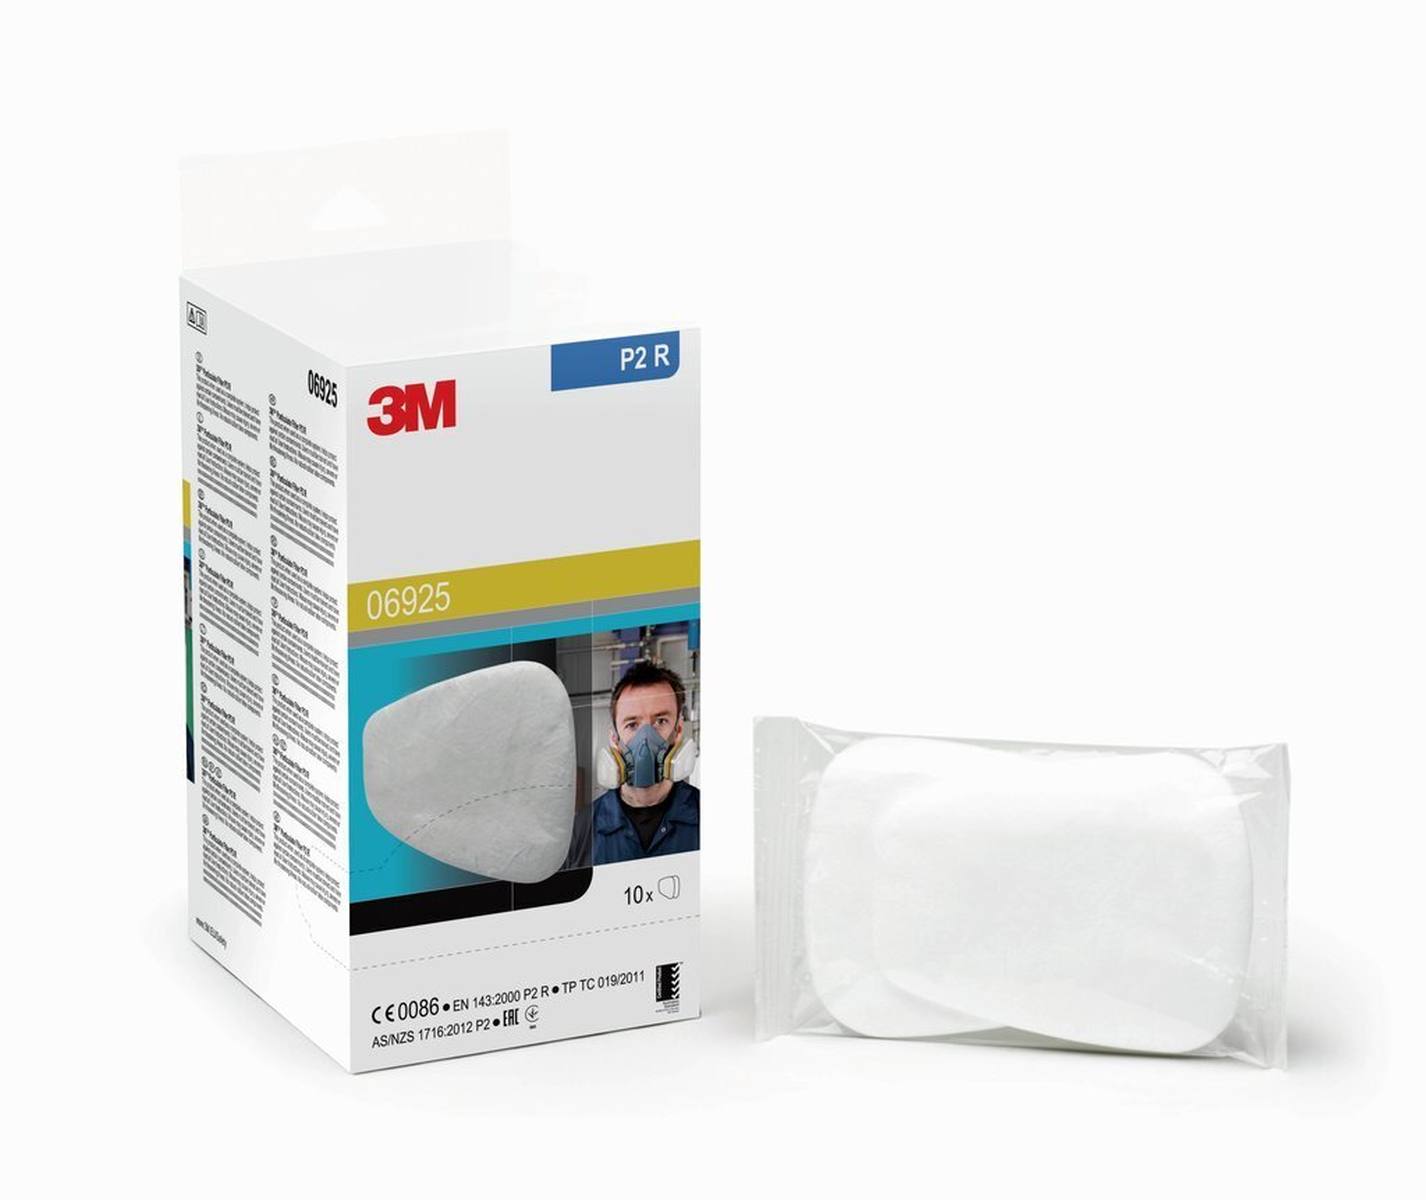 3M 06925 P2R Particle insert filter